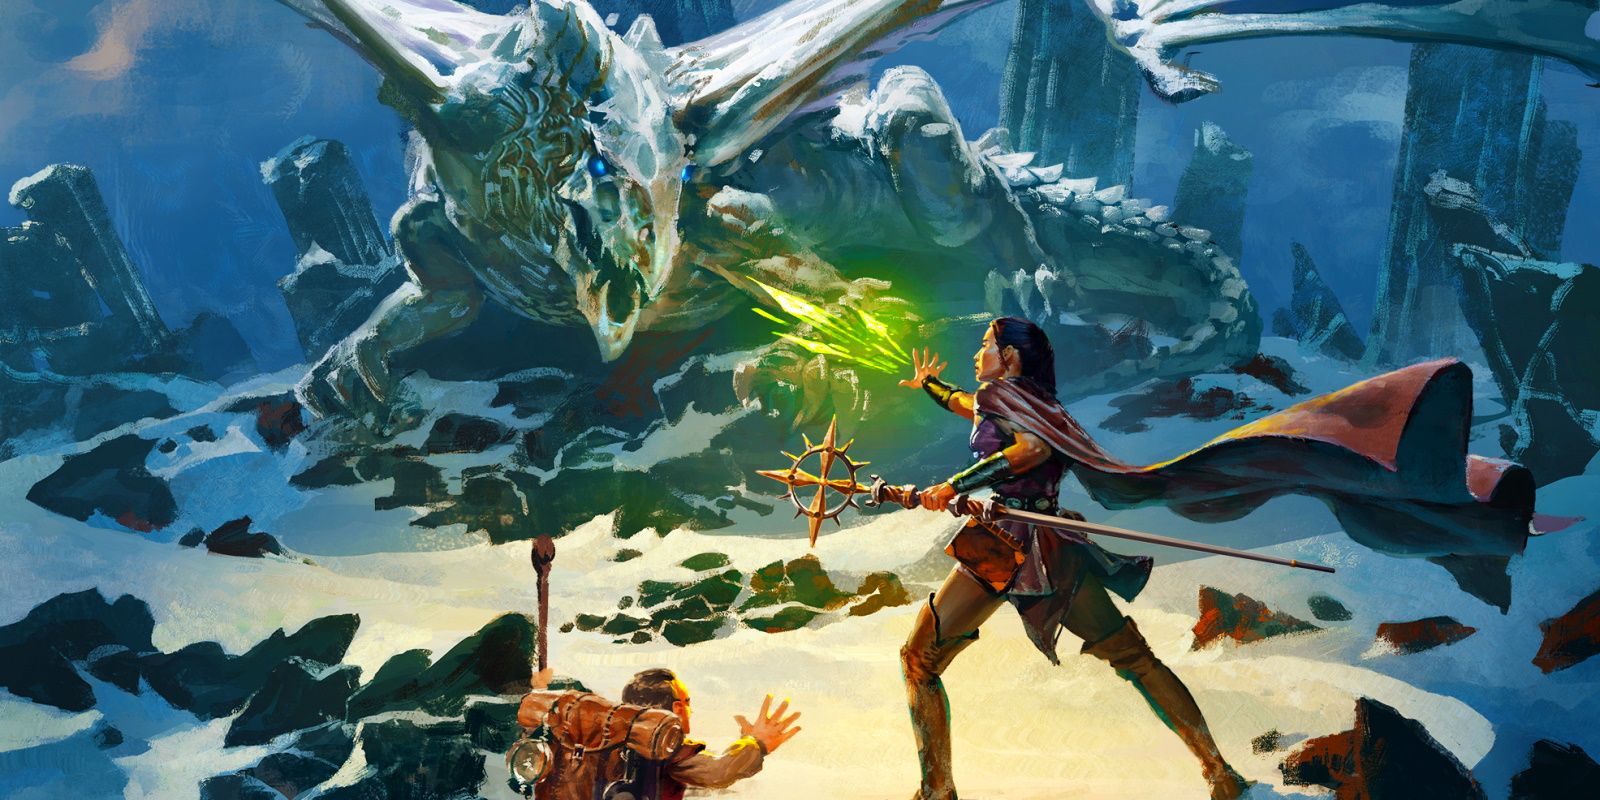 Artwork of a gnome and a sorcerer fighting a dragon in Dungeons & Dragons